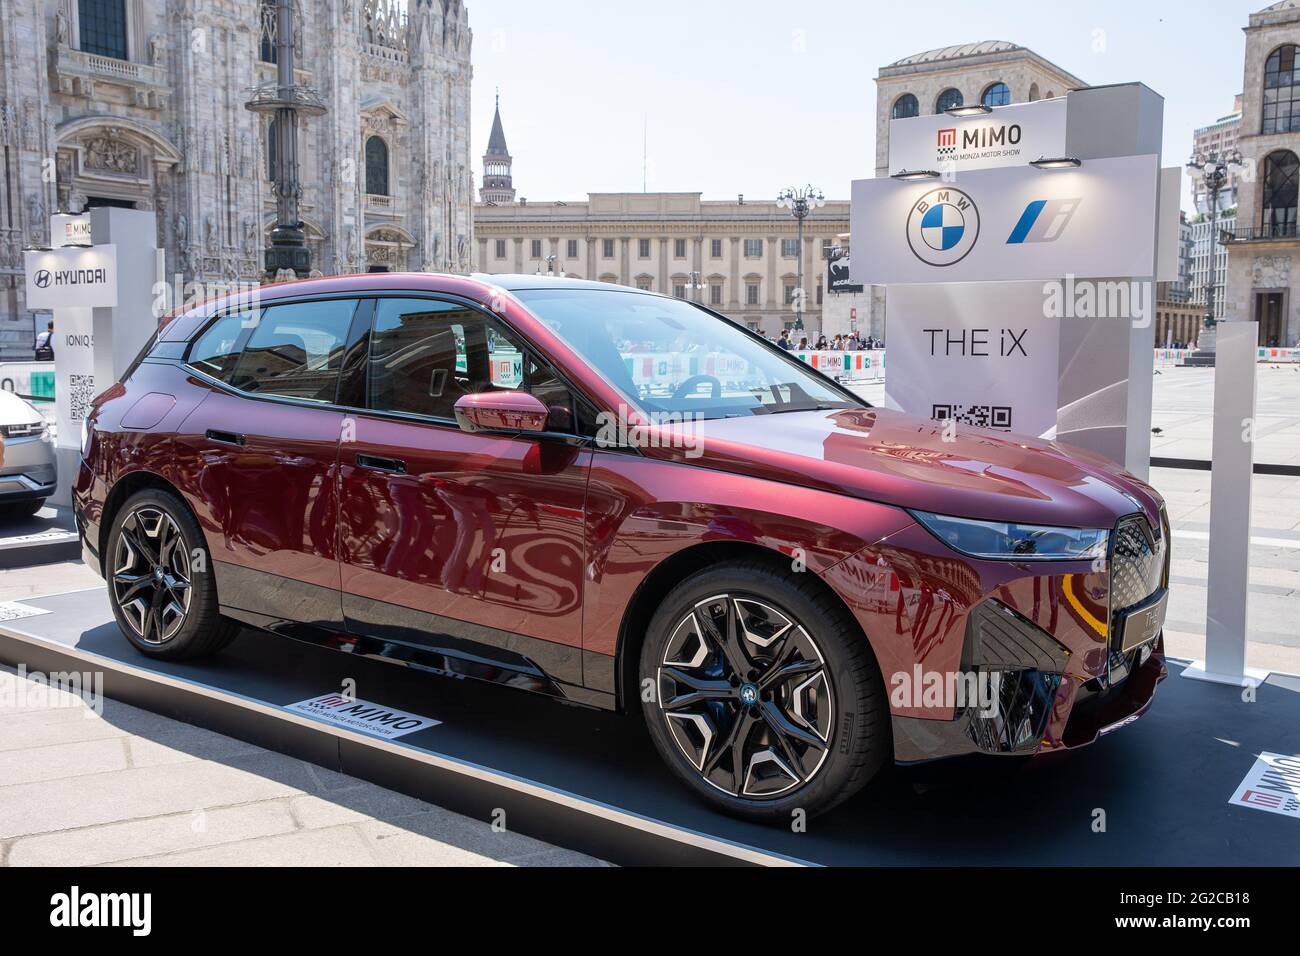 Milan, Italy. 10th June 2021. BMW IX - MILANO, ITALY, the Milan Monza Motor Show, from 10th to 13th June 2021 in Milan and Monza and will present the news of the 60 participating car and motorcycle manufacturers. With a democratic format, in which brands will exhibit their cars on equal stands, MIMO wants to give a restart signal for the world of fair and the automotive sector, with a free access and safe exhibition. Stock Photo